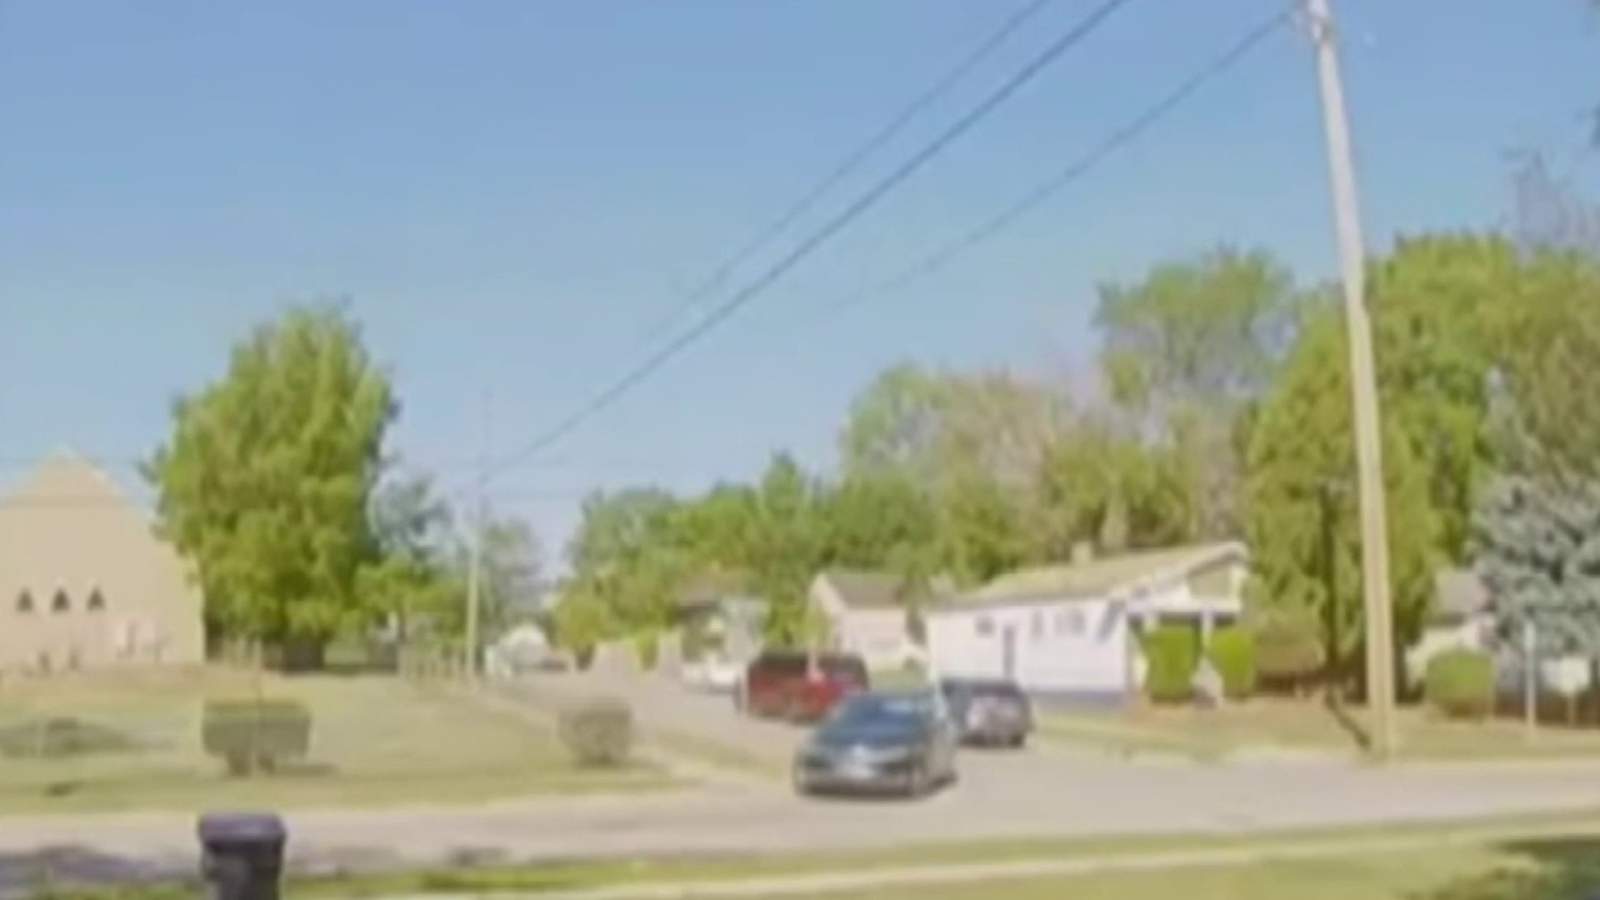 Drive-by shooting caught on home surveillance camera in Pontiac